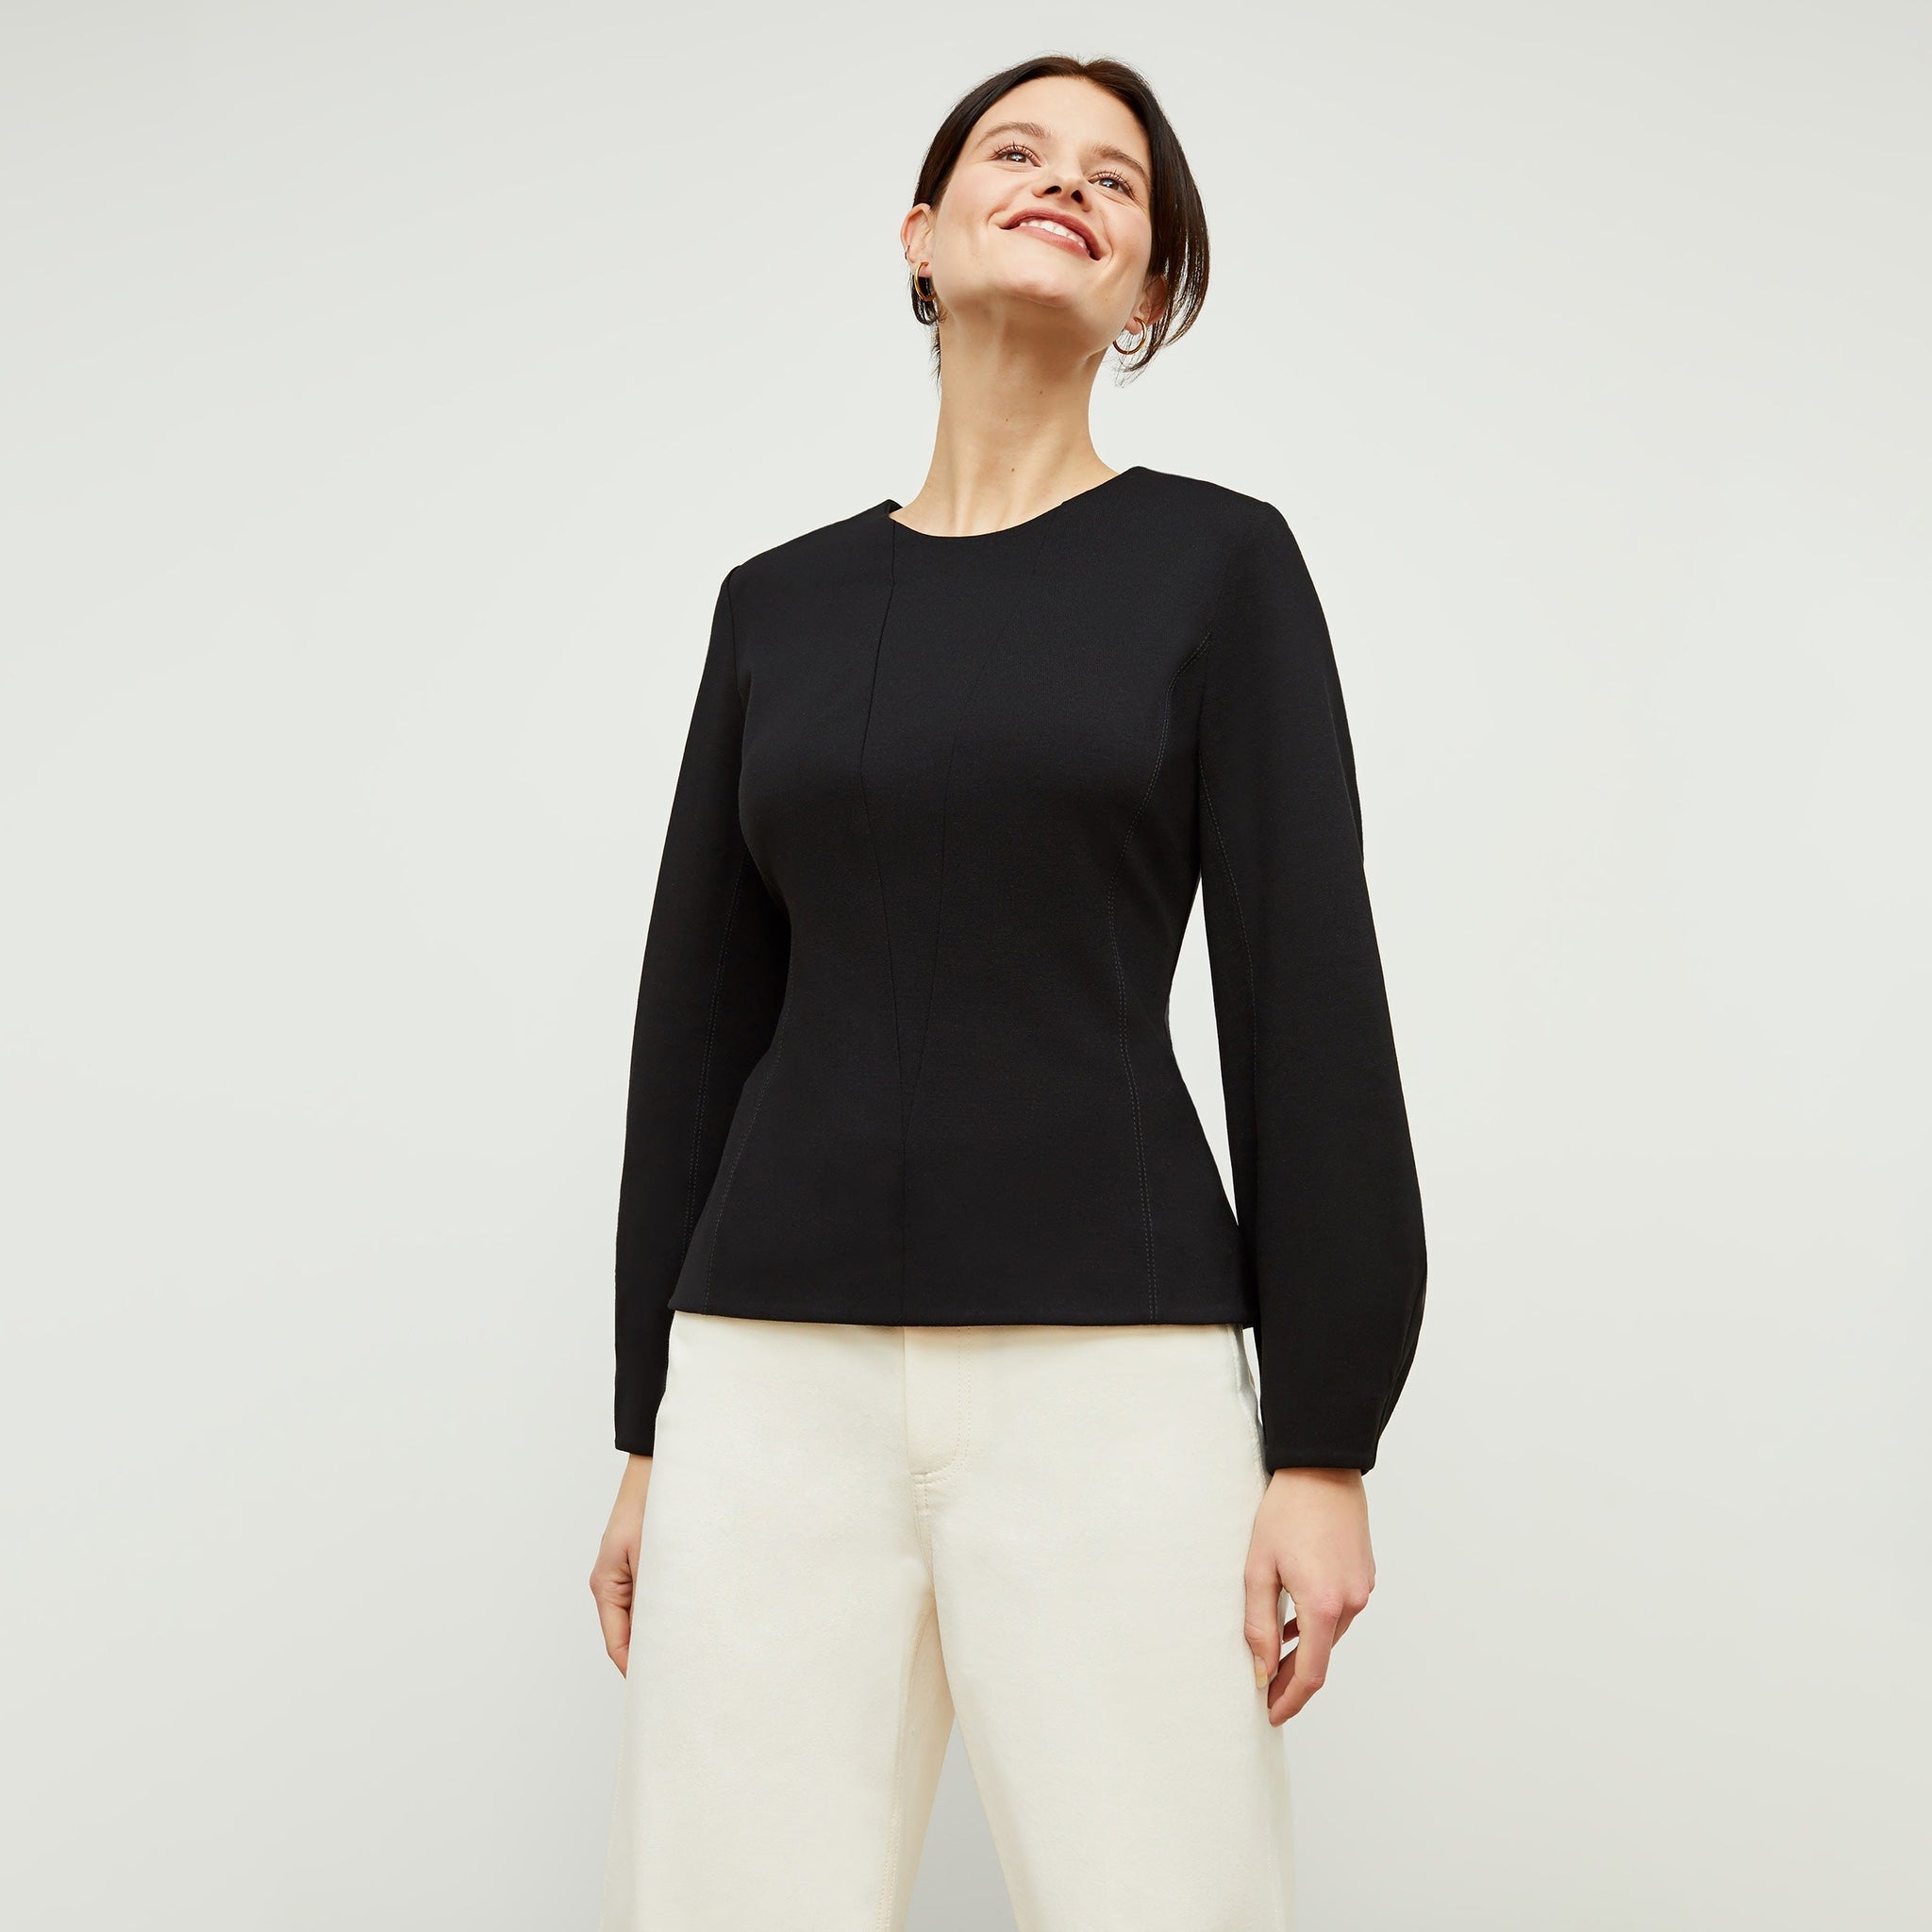 Front image of a woman standing wearing the rashida top in black